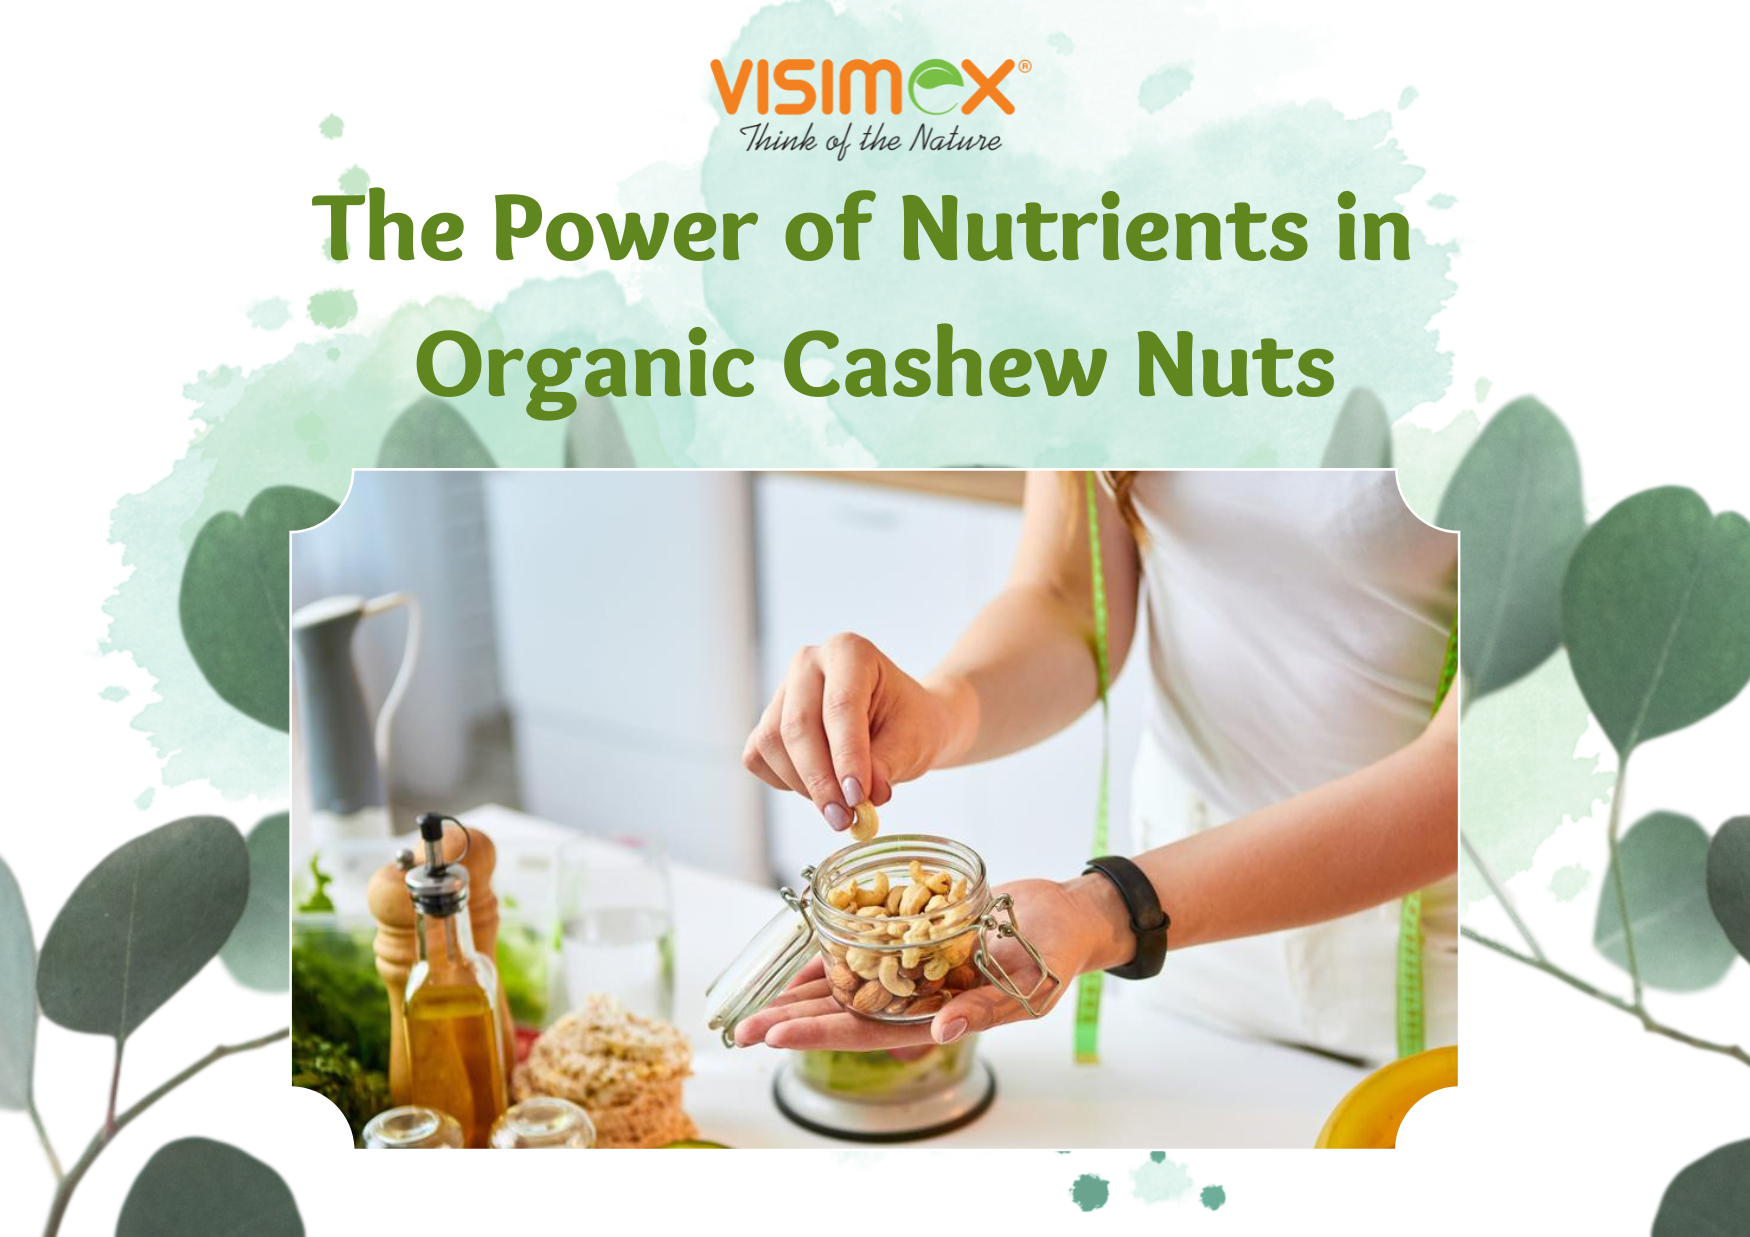 The Power of Nutrients in Organic Cashew Nuts